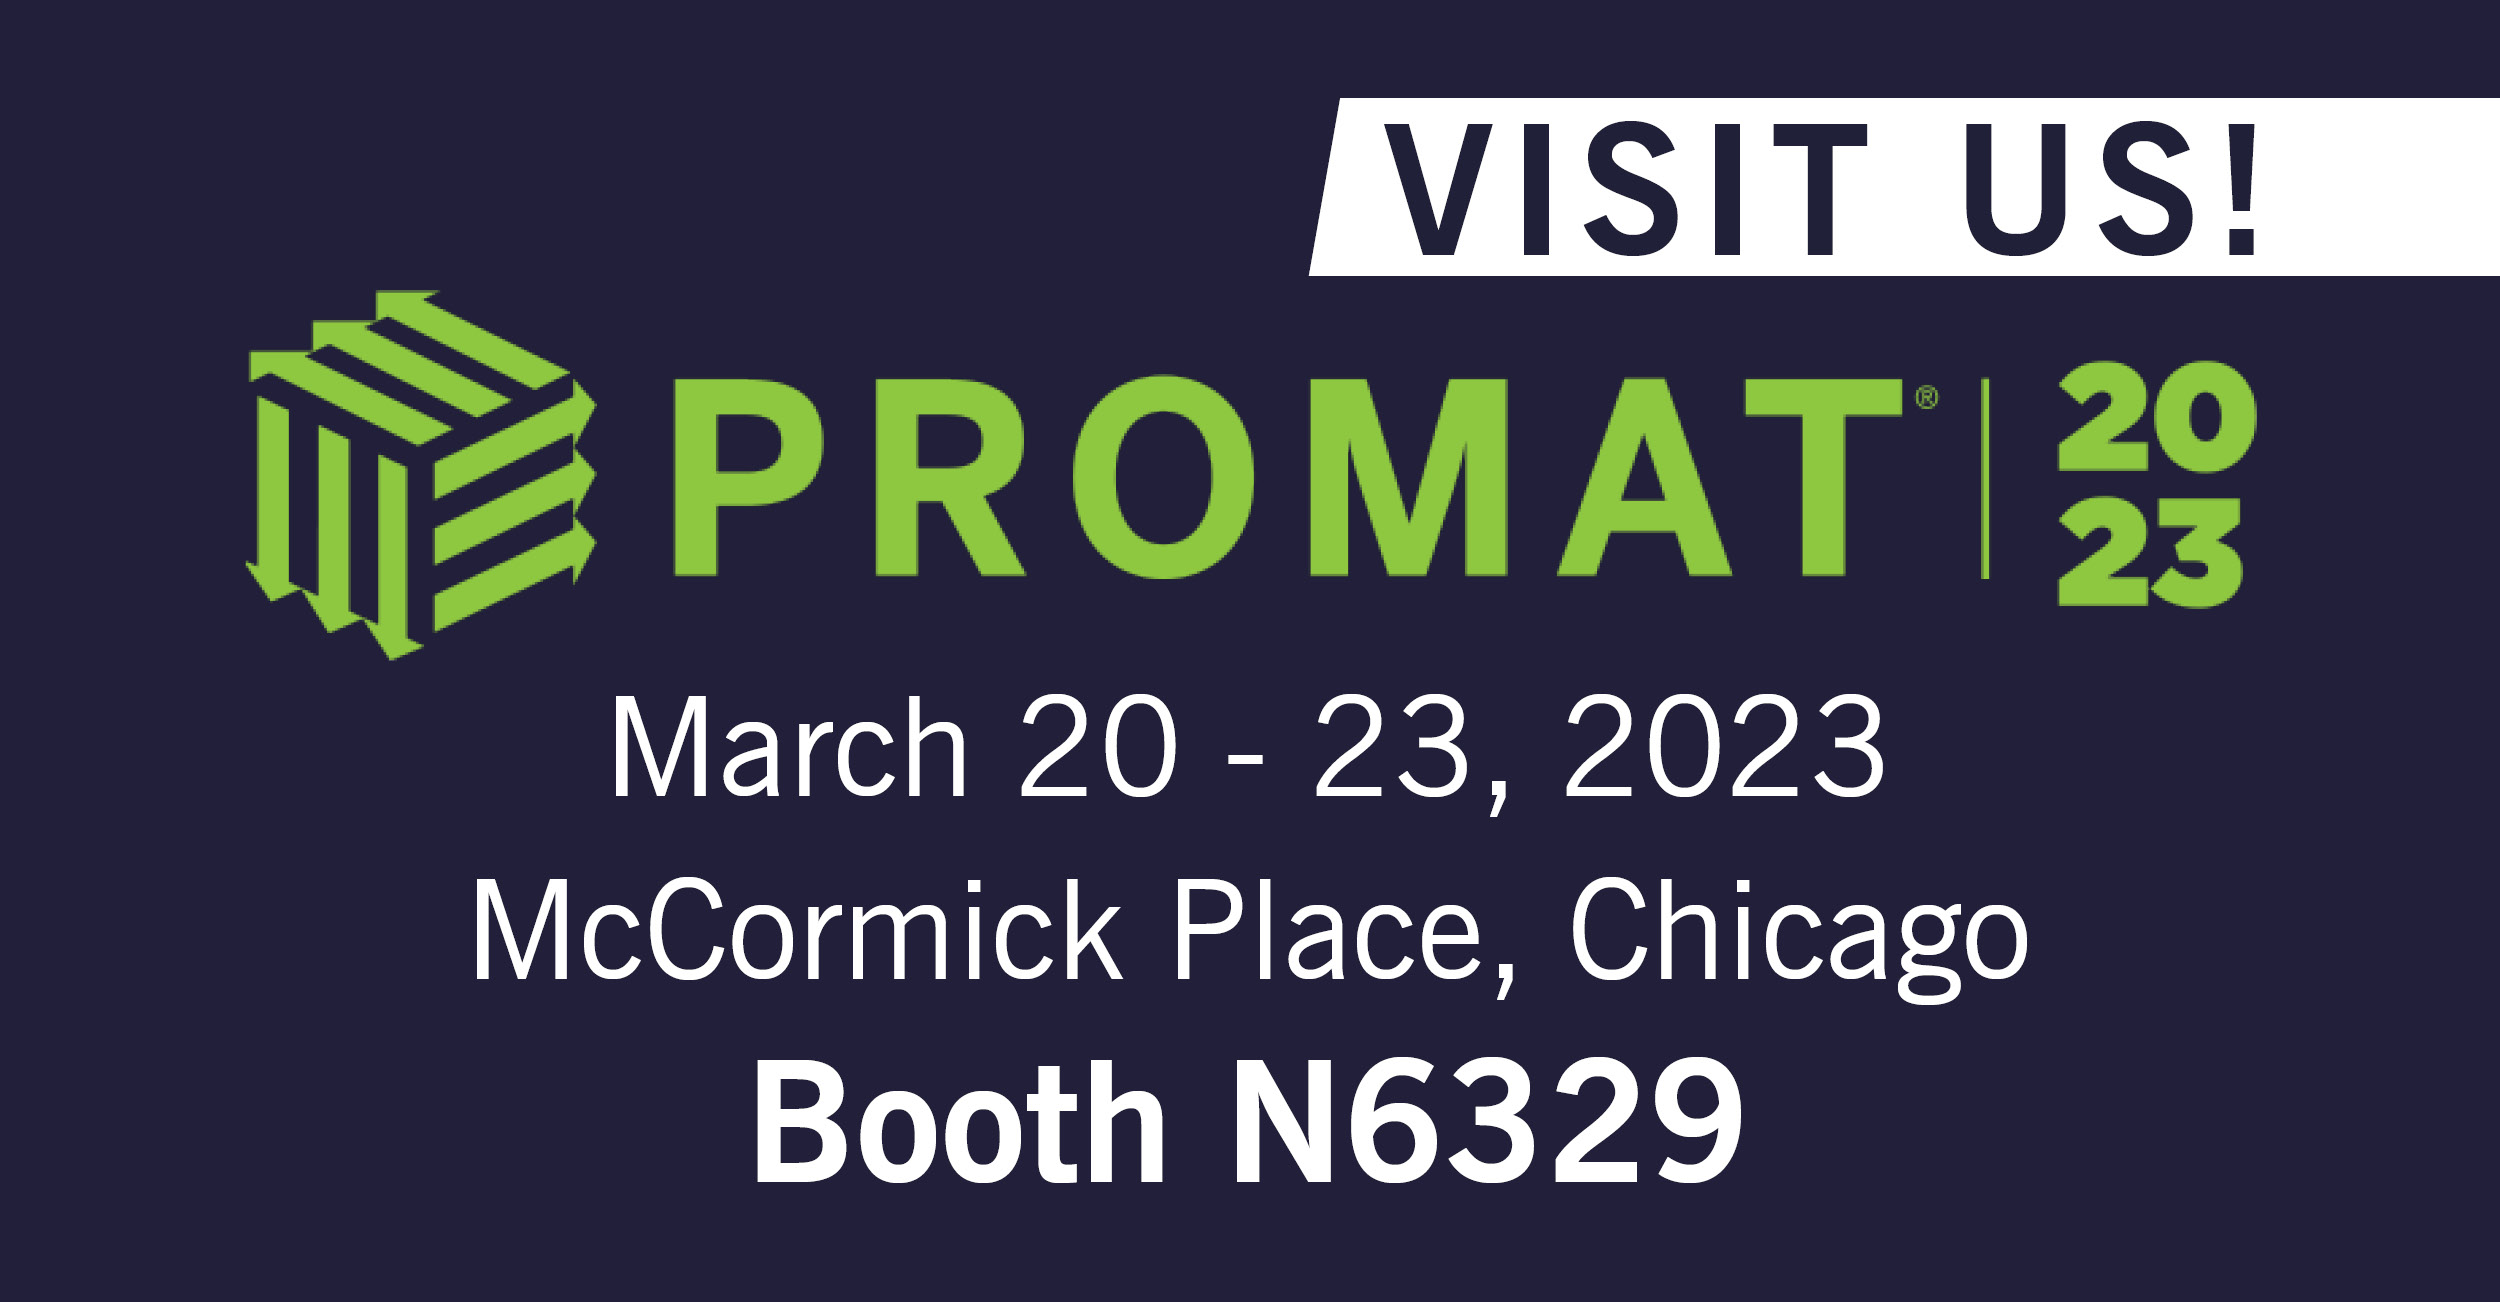 Countdown for ProMAT is running. Meet us in Chicago